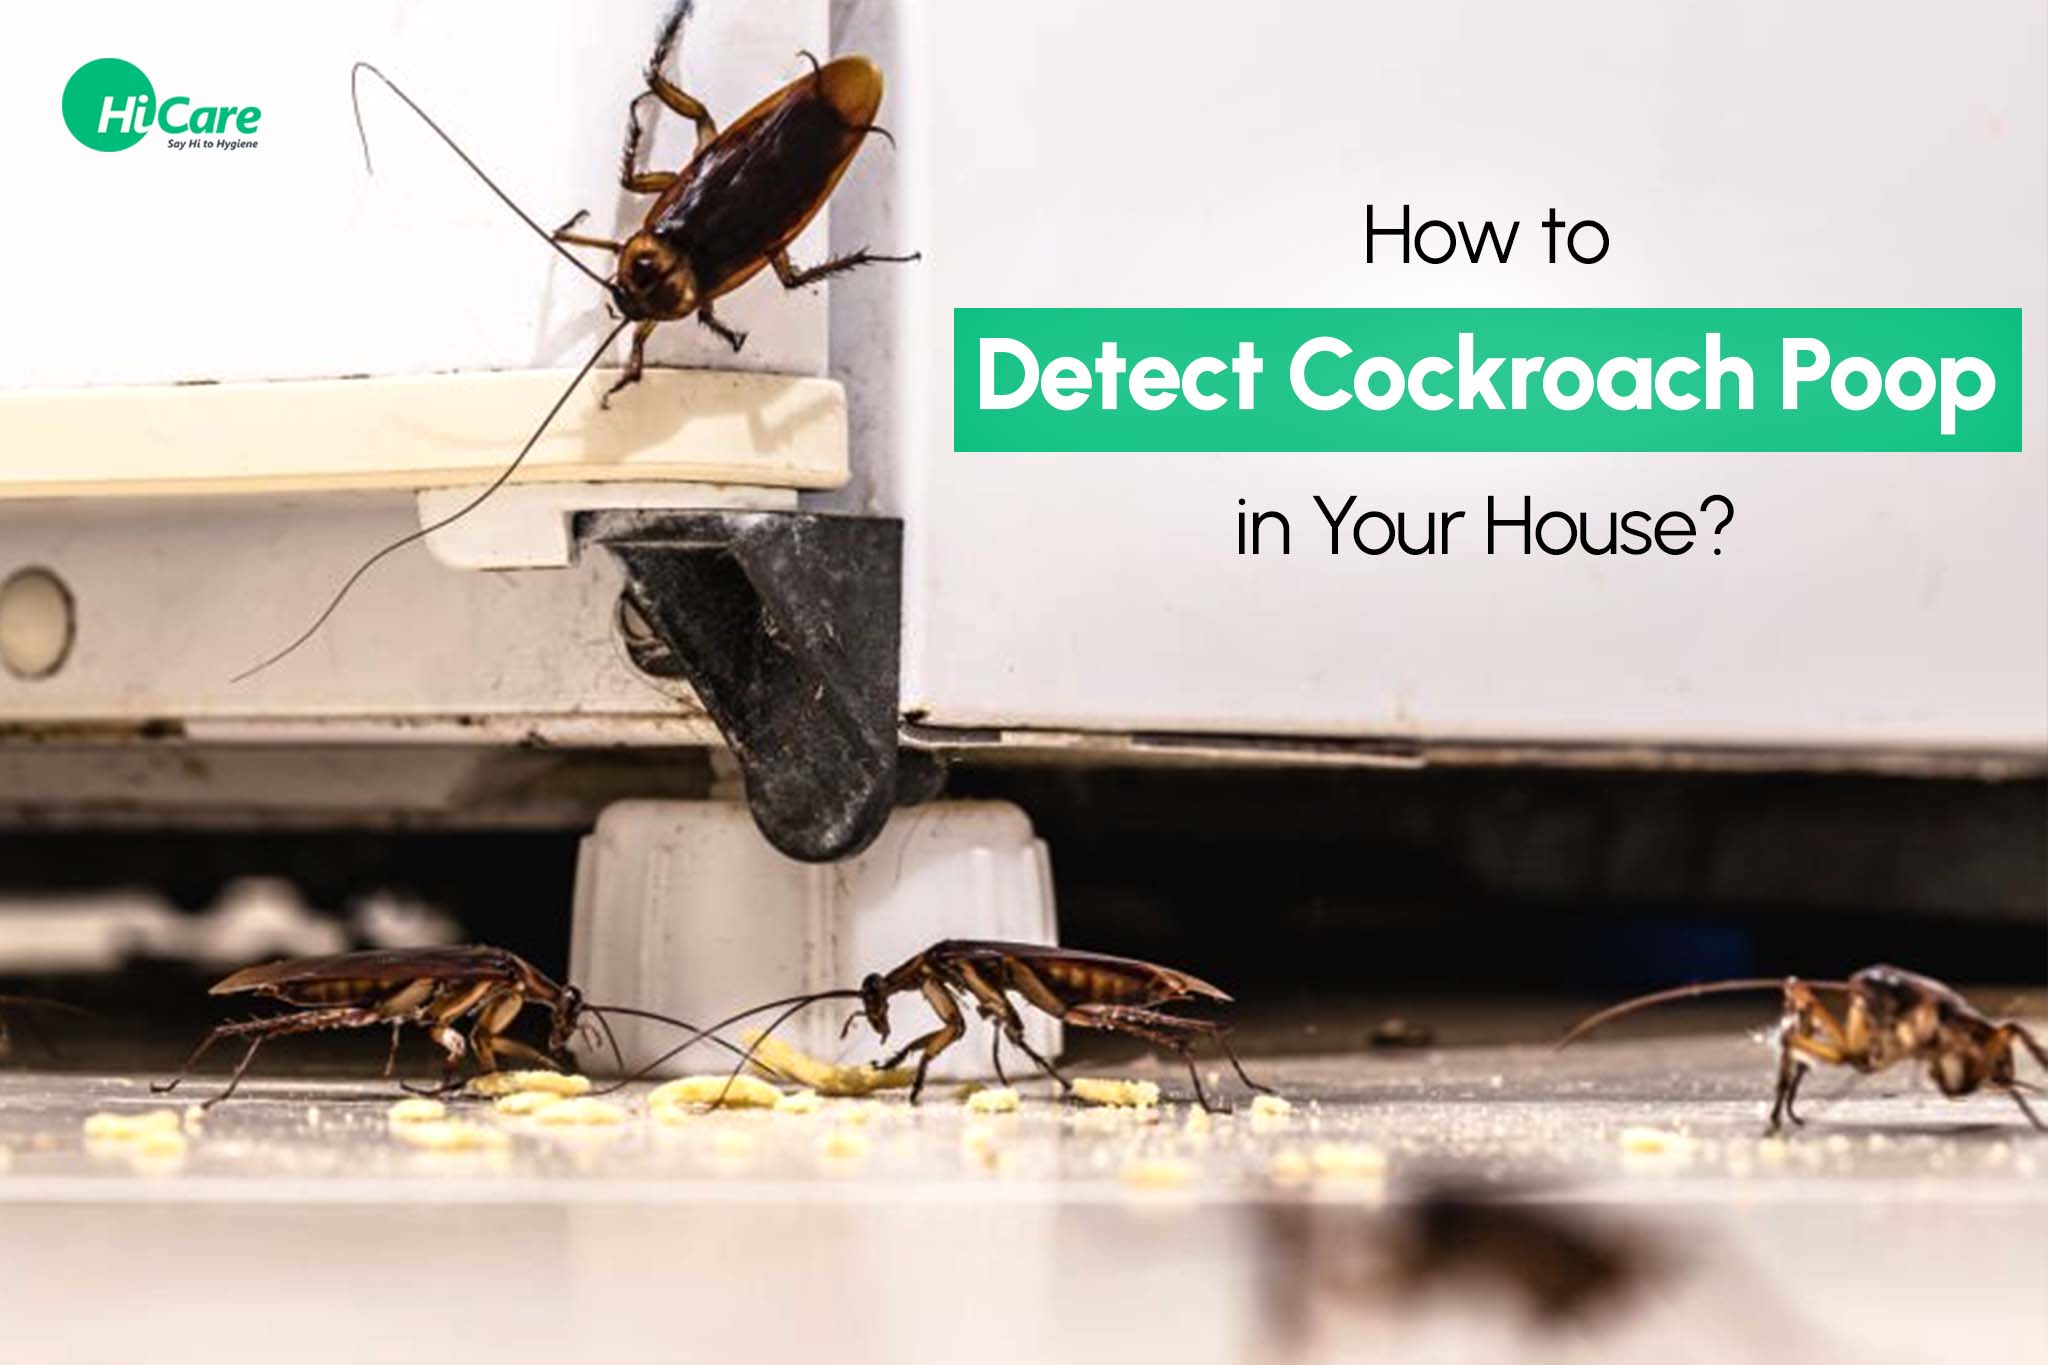 How to Detect Cockroach Poop in Your House?